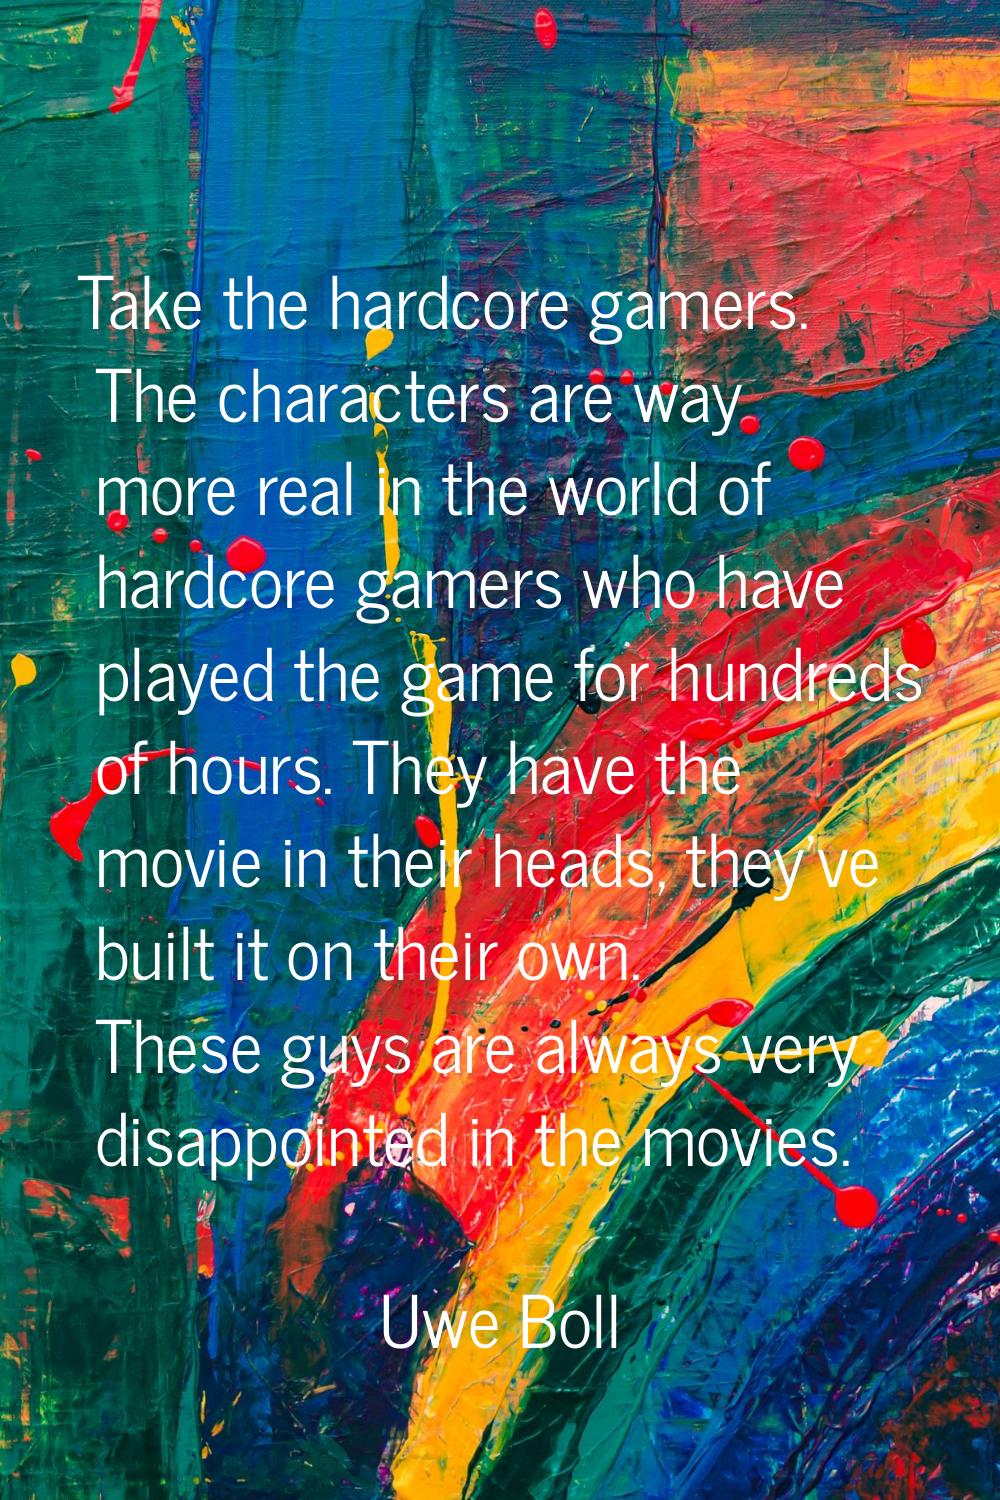 Take the hardcore gamers. The characters are way more real in the world of hardcore gamers who have